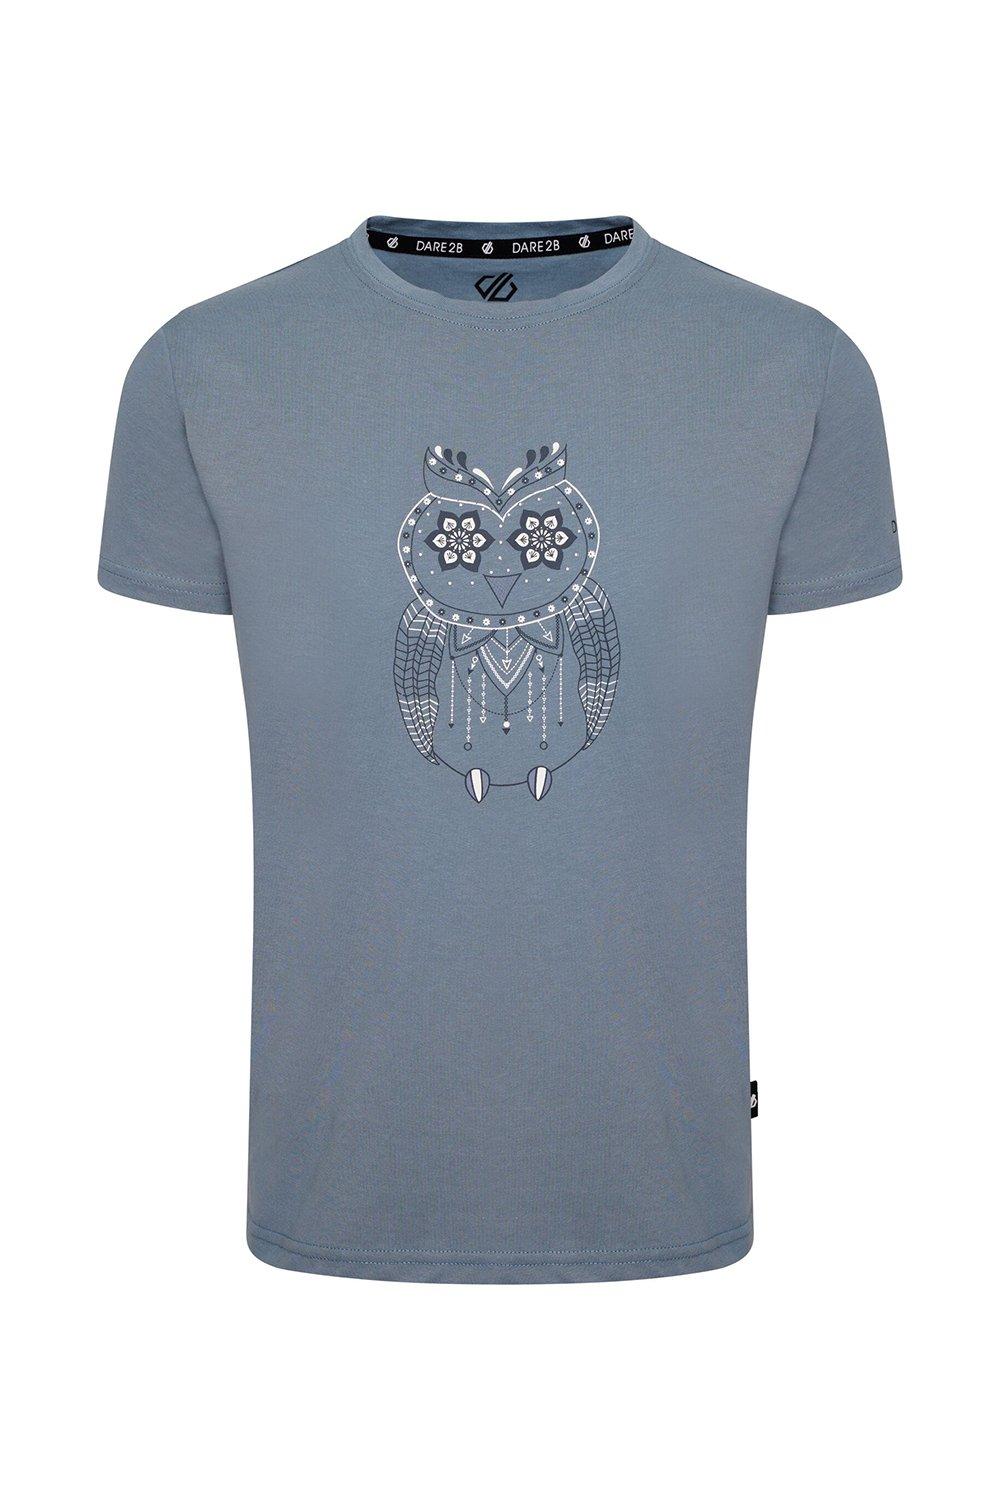 ’Go Beyond’ Short Sleeved Graphic T-Shirt